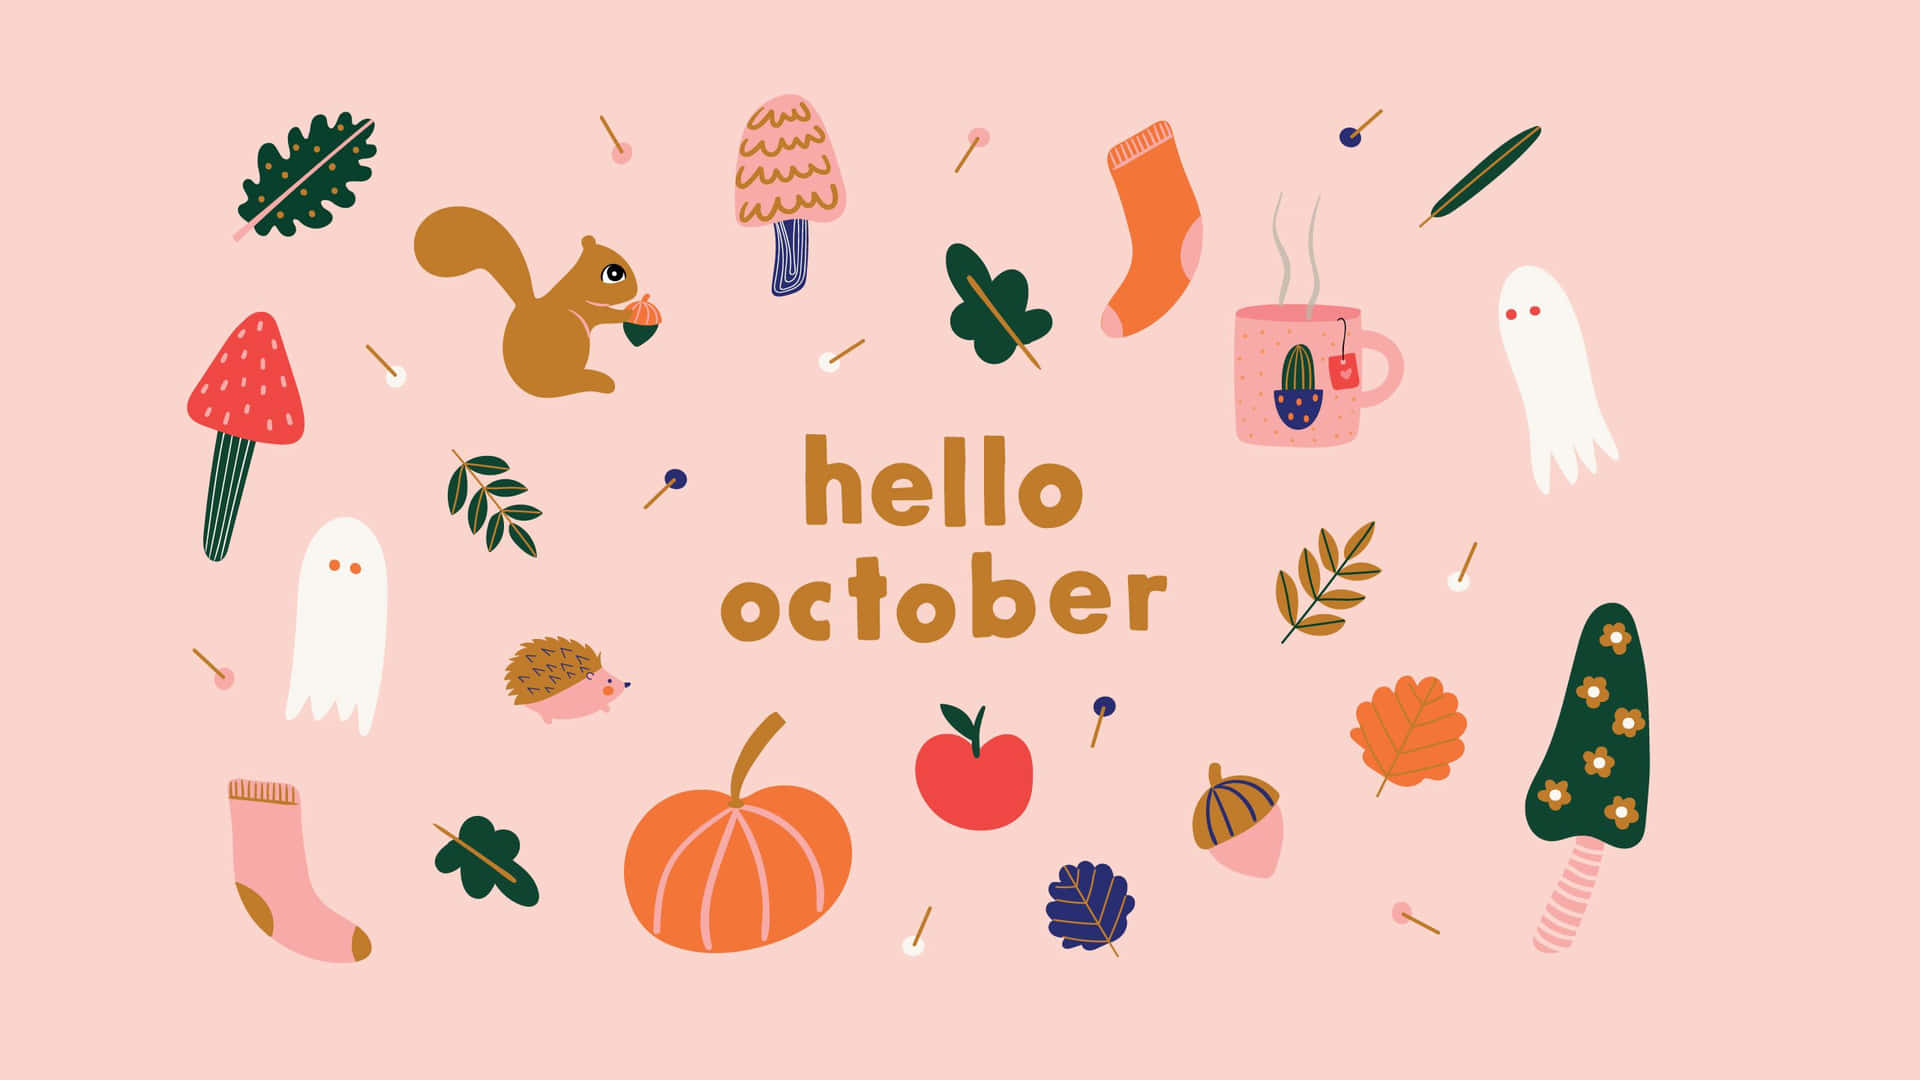 Celebrating the beauty of October all month long